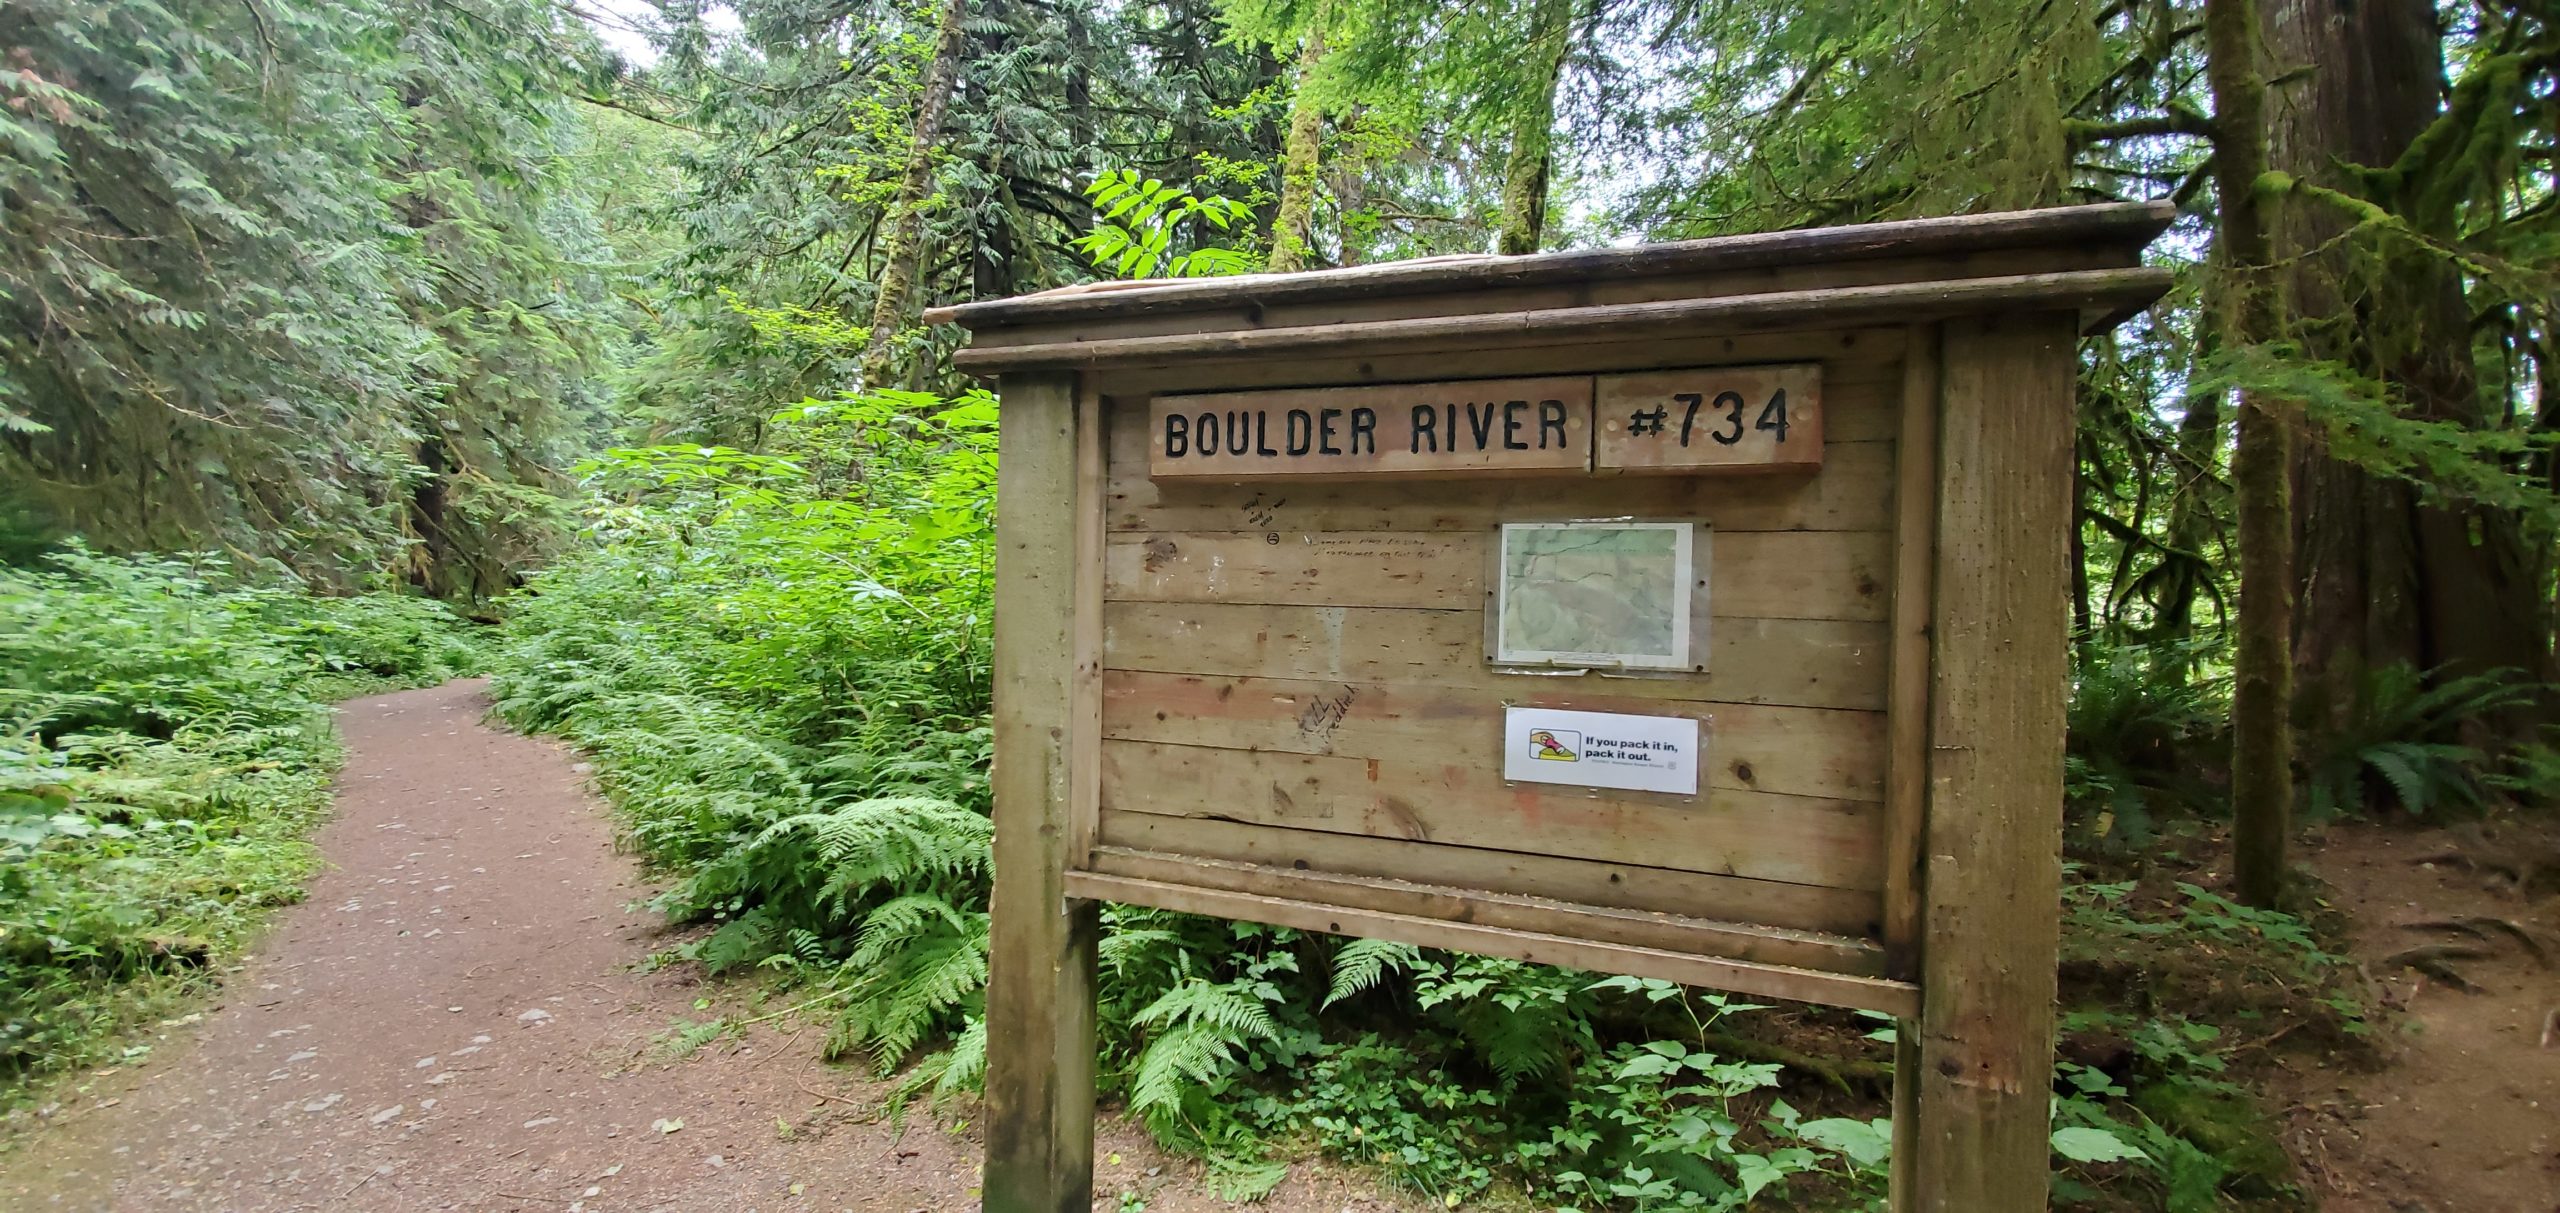 Boulder Creek Trail #734 just about 10 miles from Cascade National Park